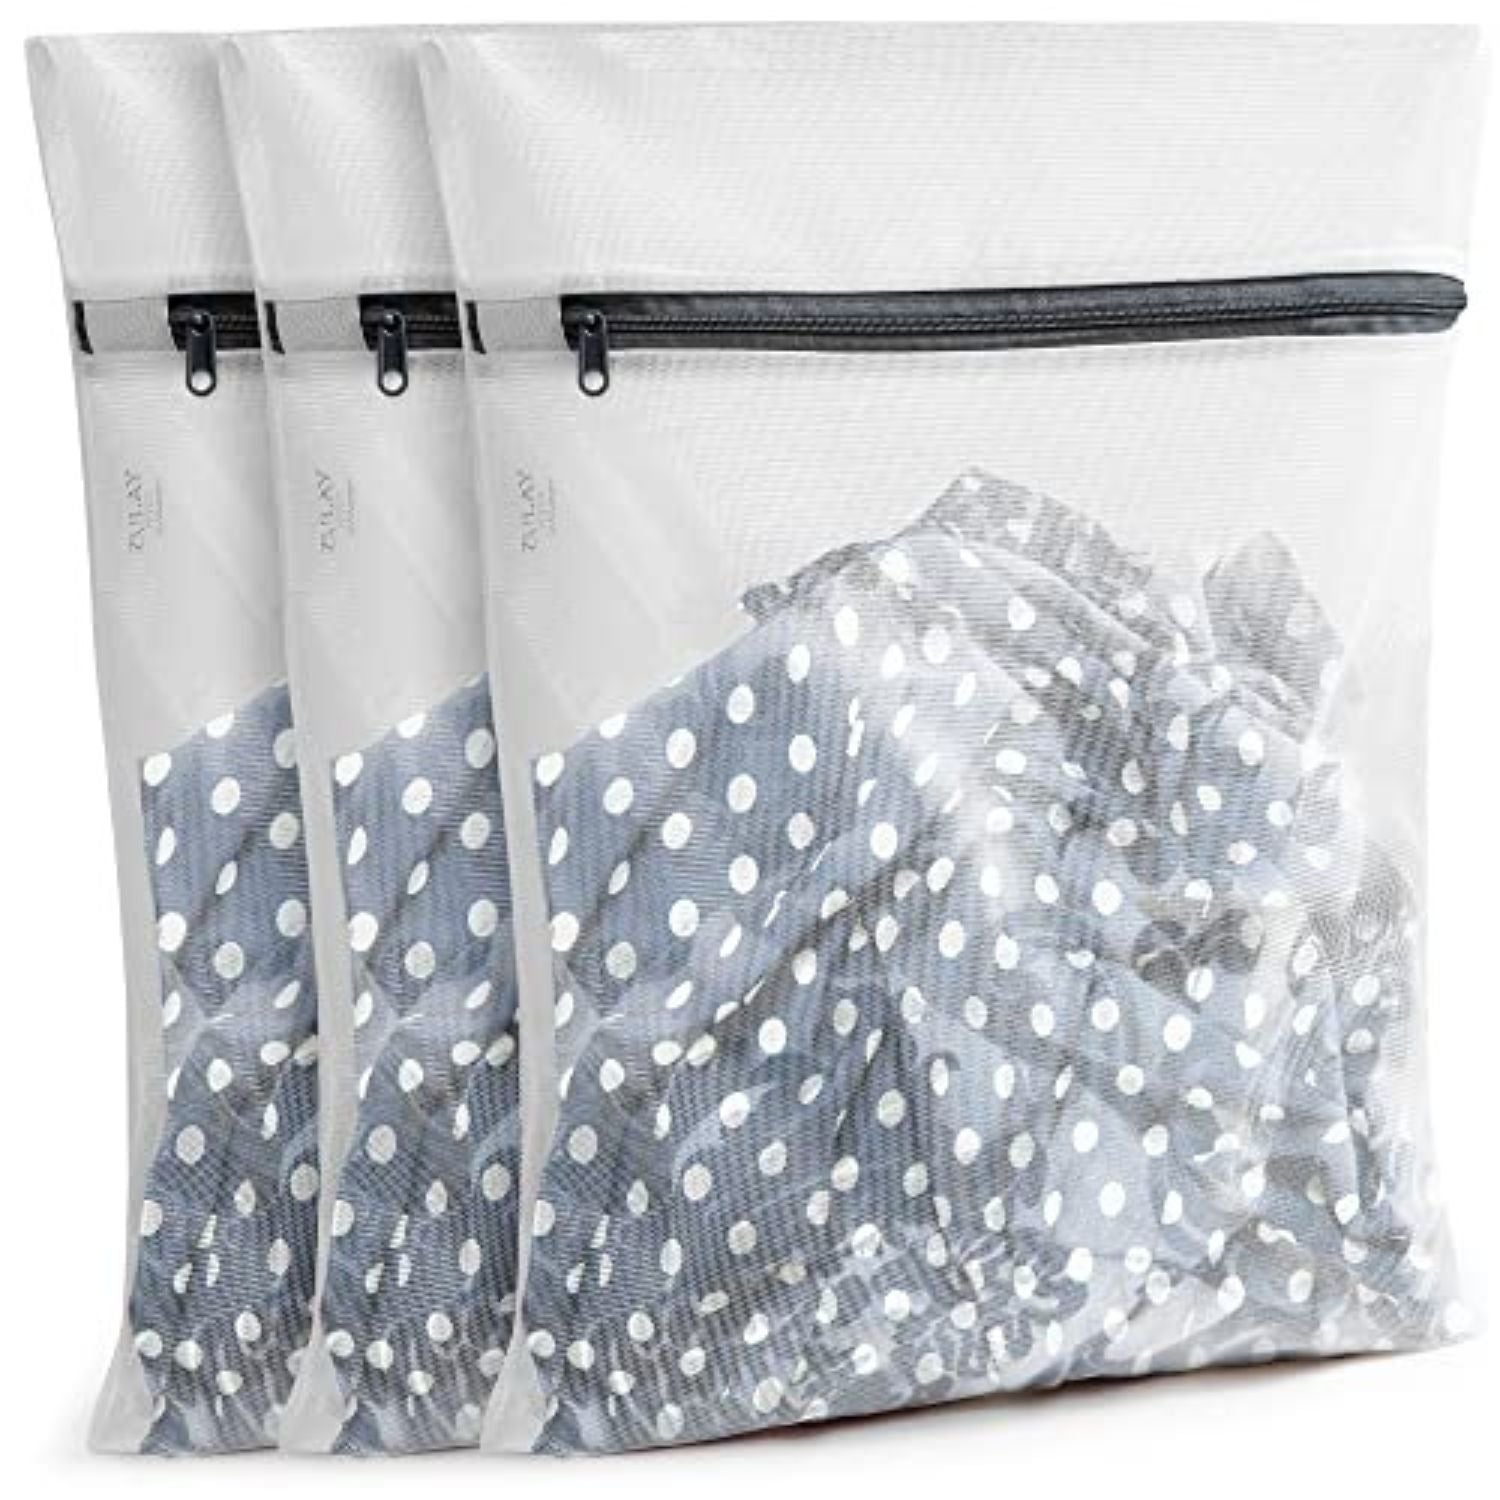 Zulay Home Mesh Laundry Bags